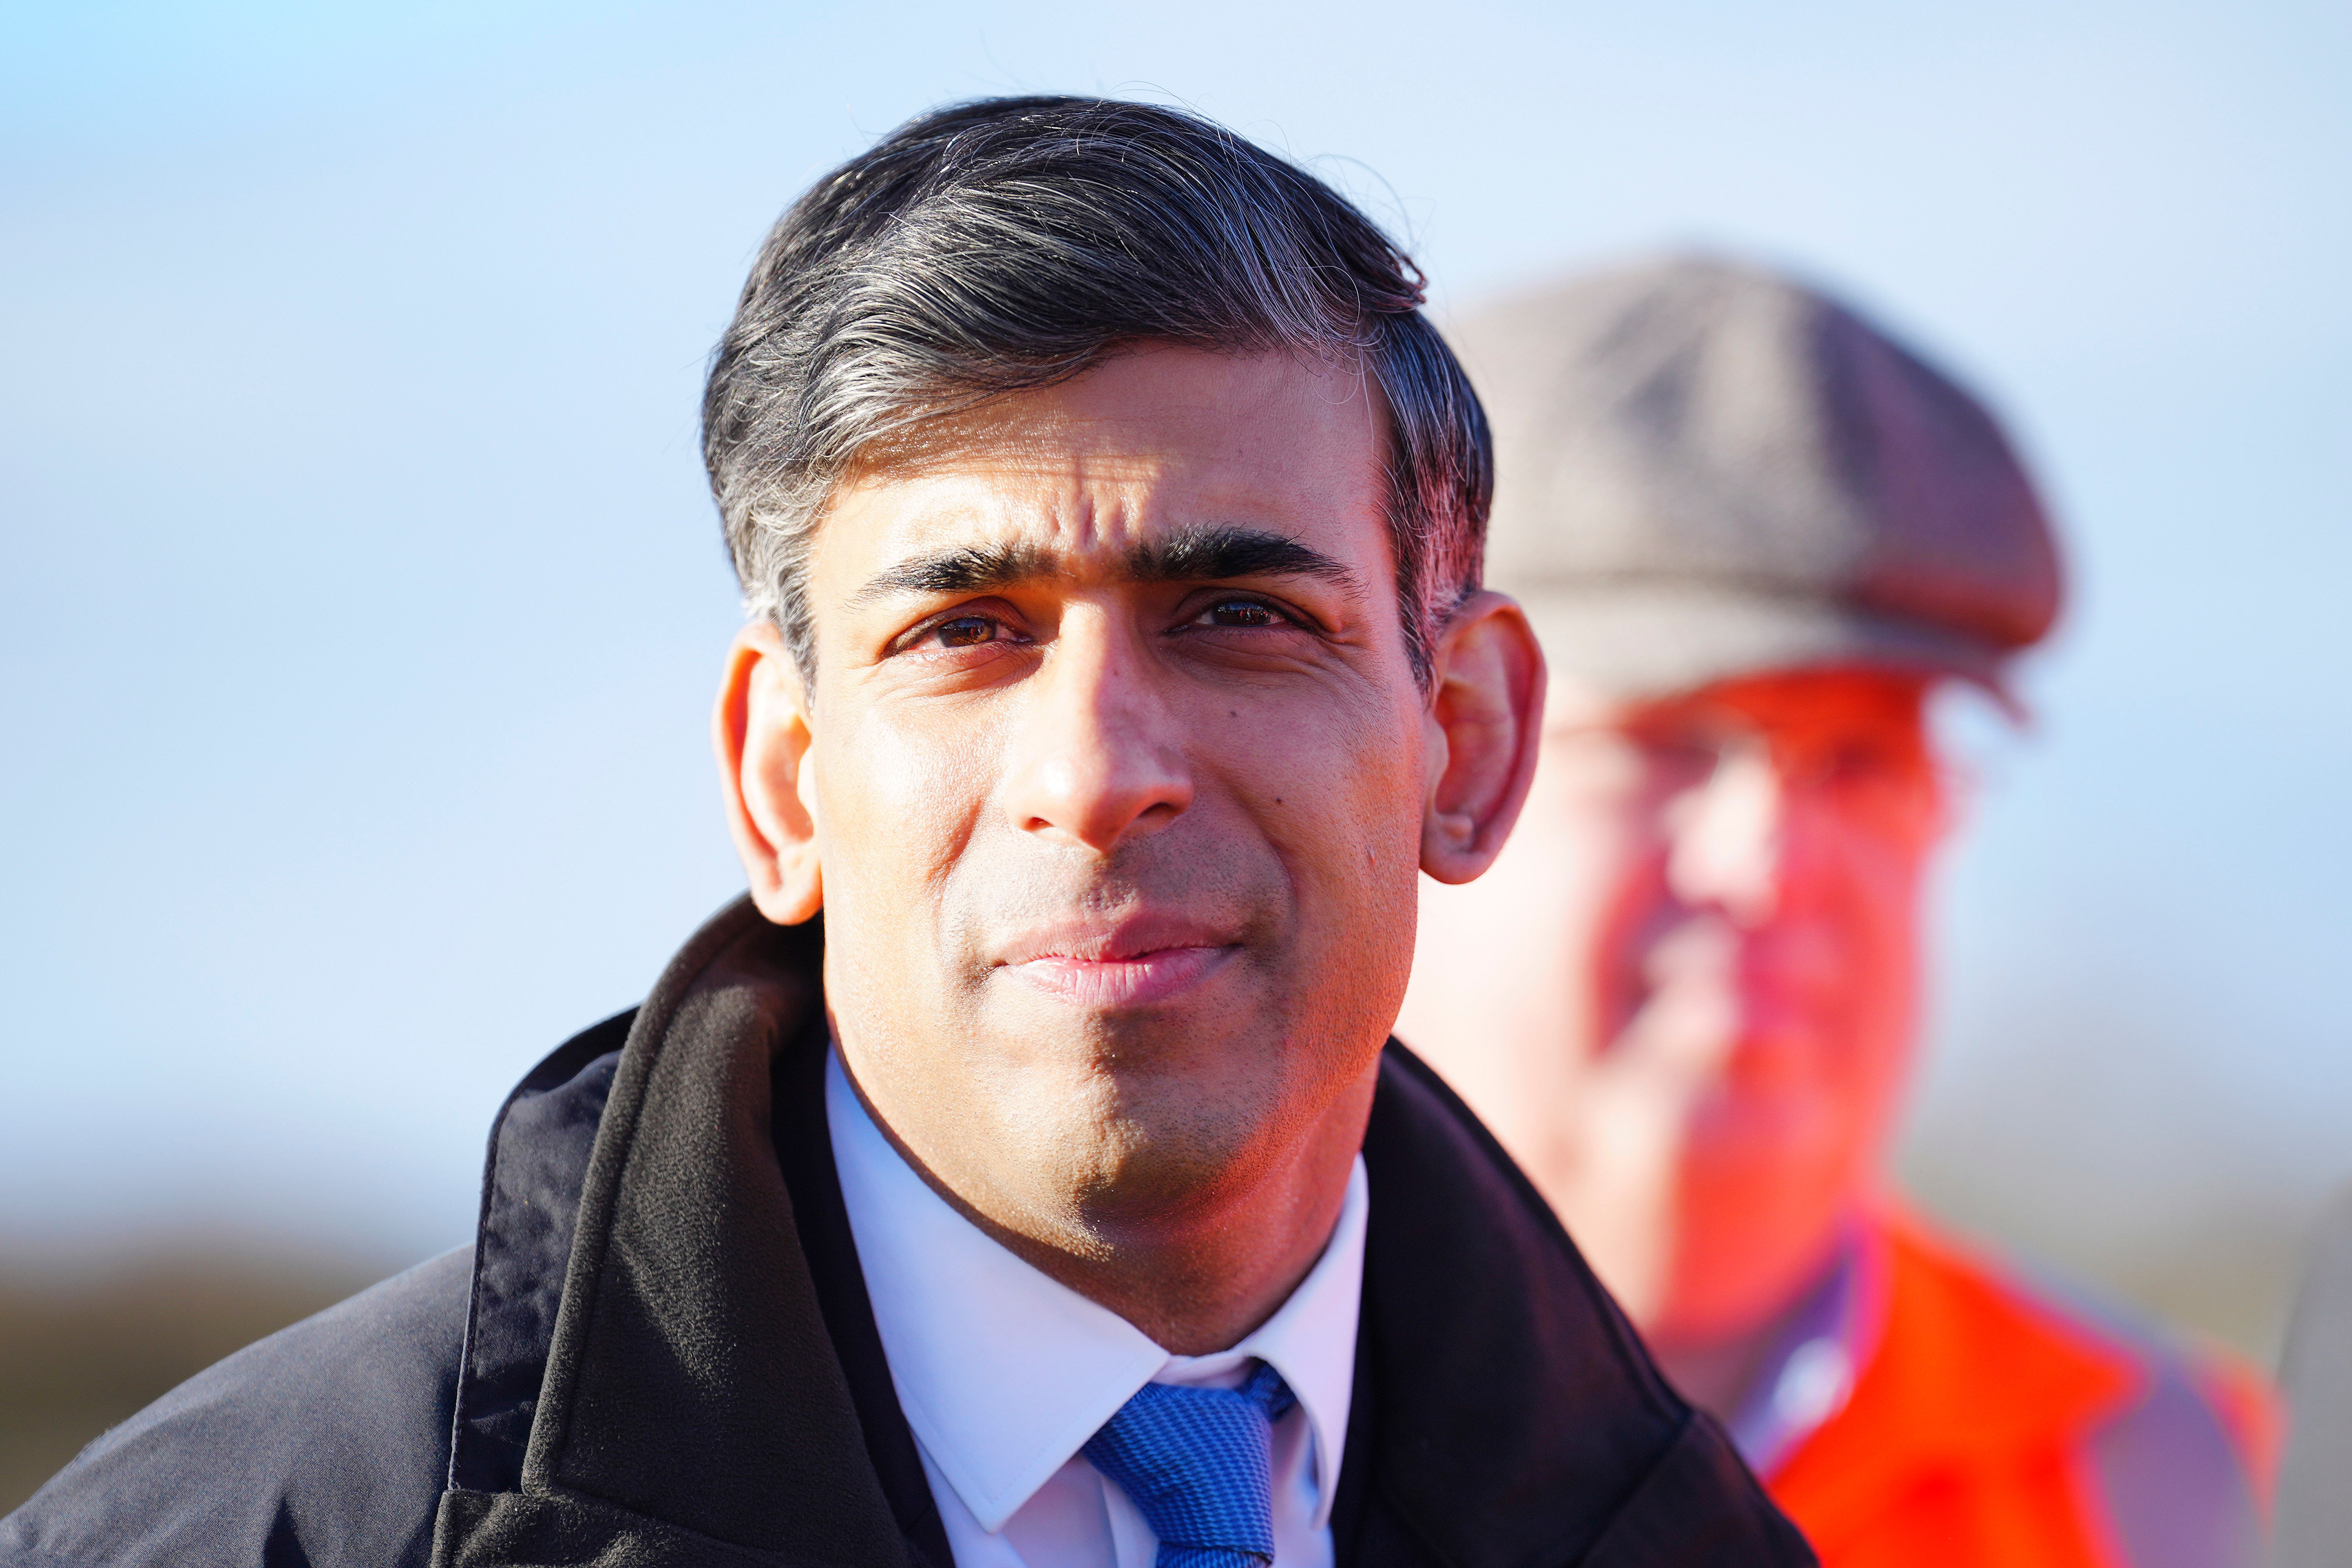 Rishi Sunak has condemned the comments made by Lee Anderson, the former deputy party chairman